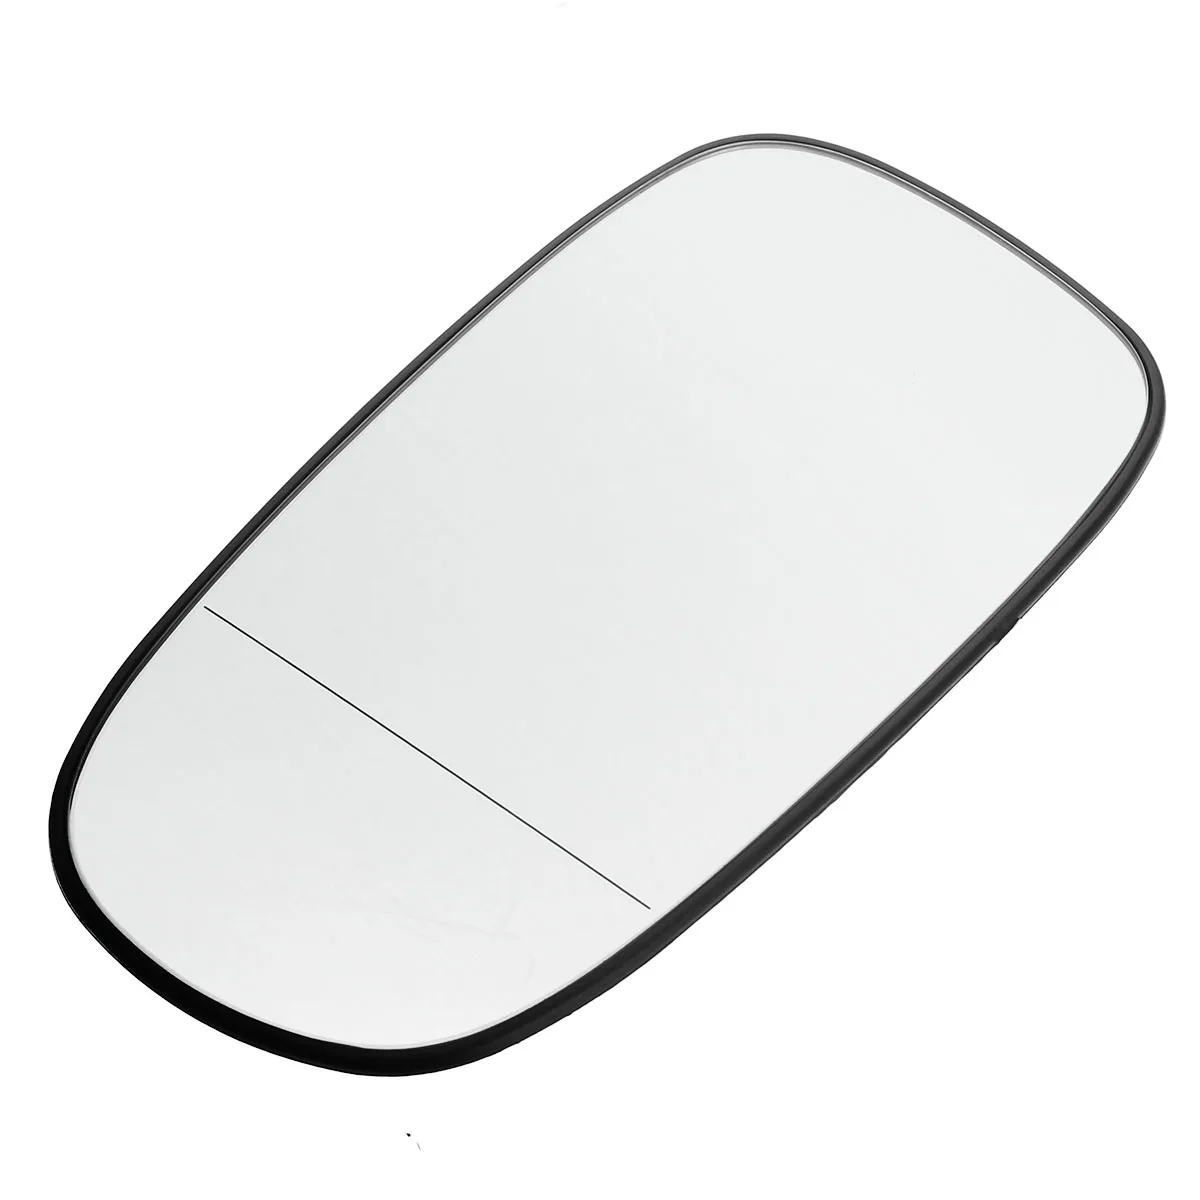 Left Hand Passenger Side WIDE ANGLE WING DOOR MIRROR GLASS For Saab 9-3 1998-02